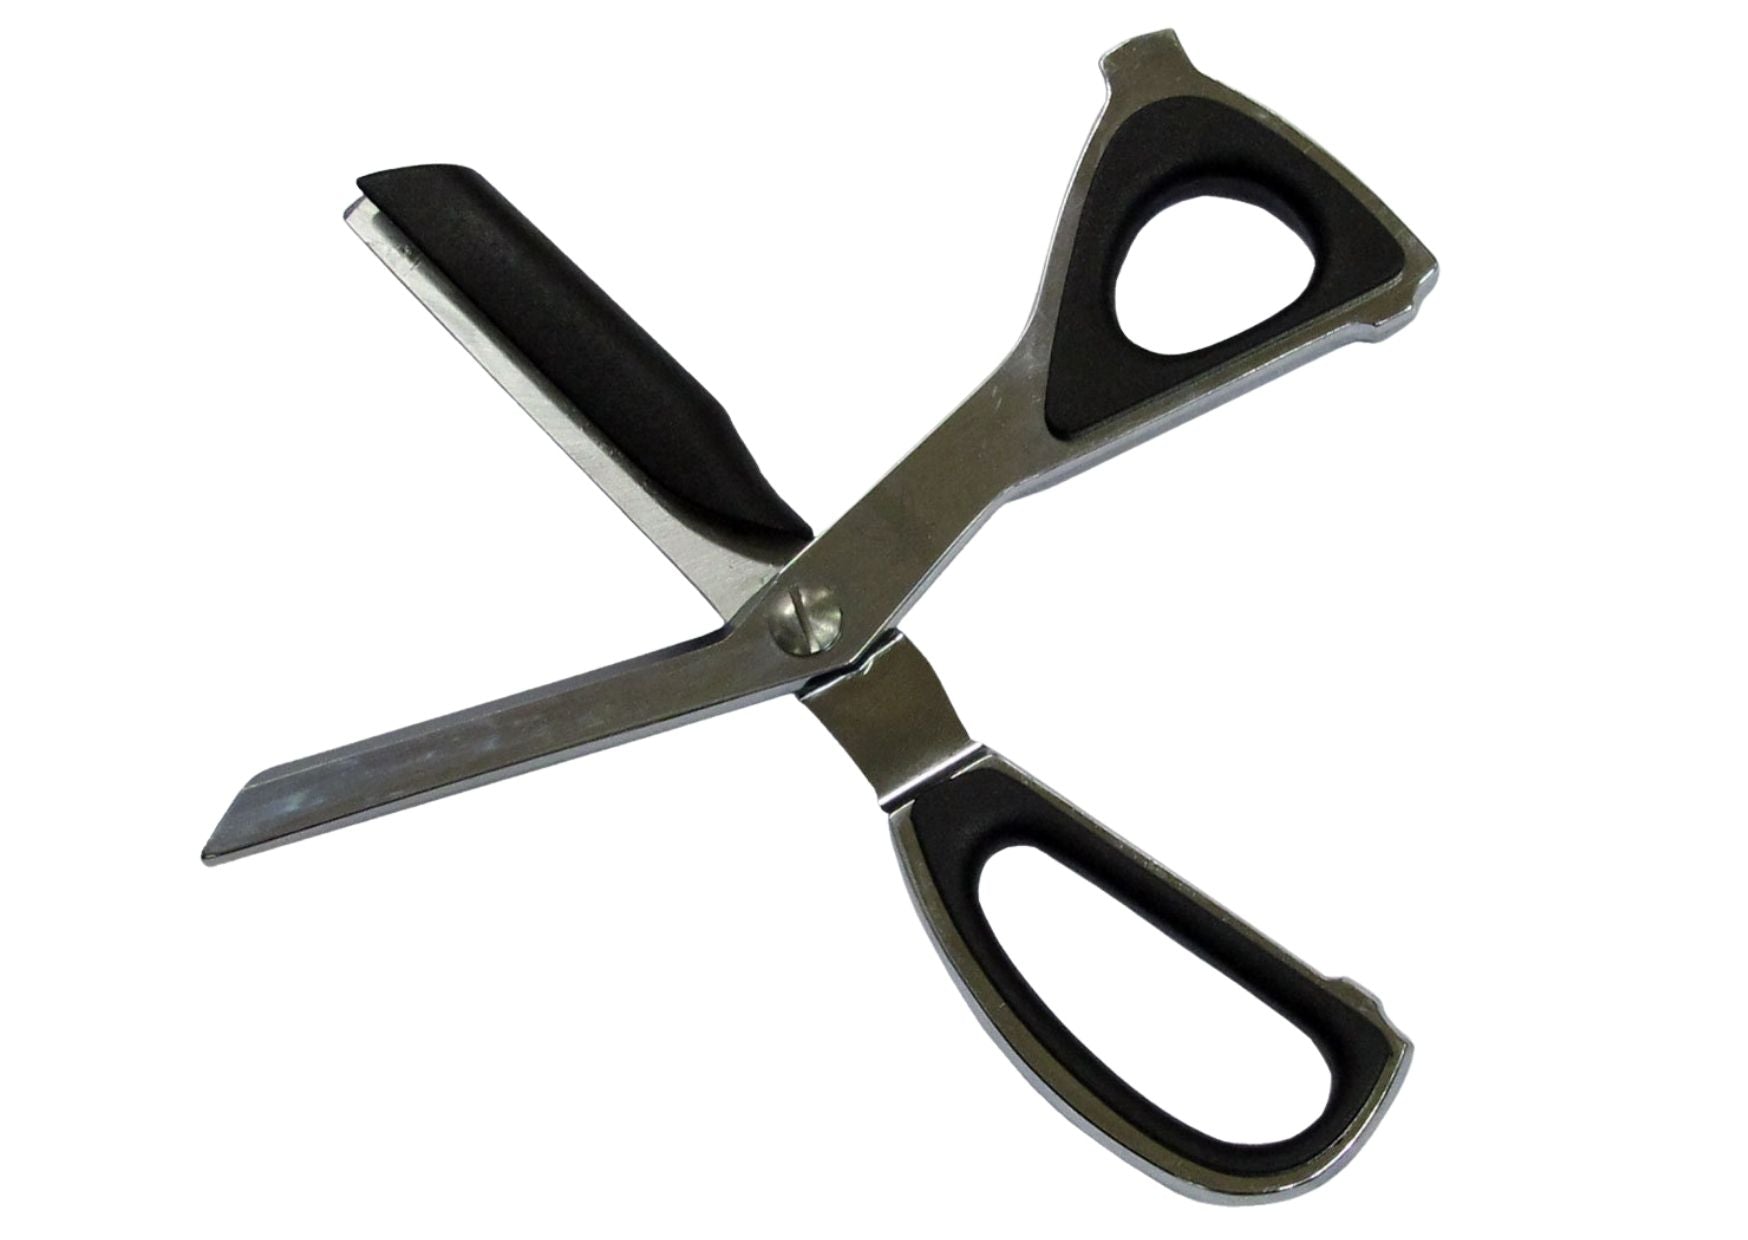 Lavabis multifunction rescue shears stainless steel